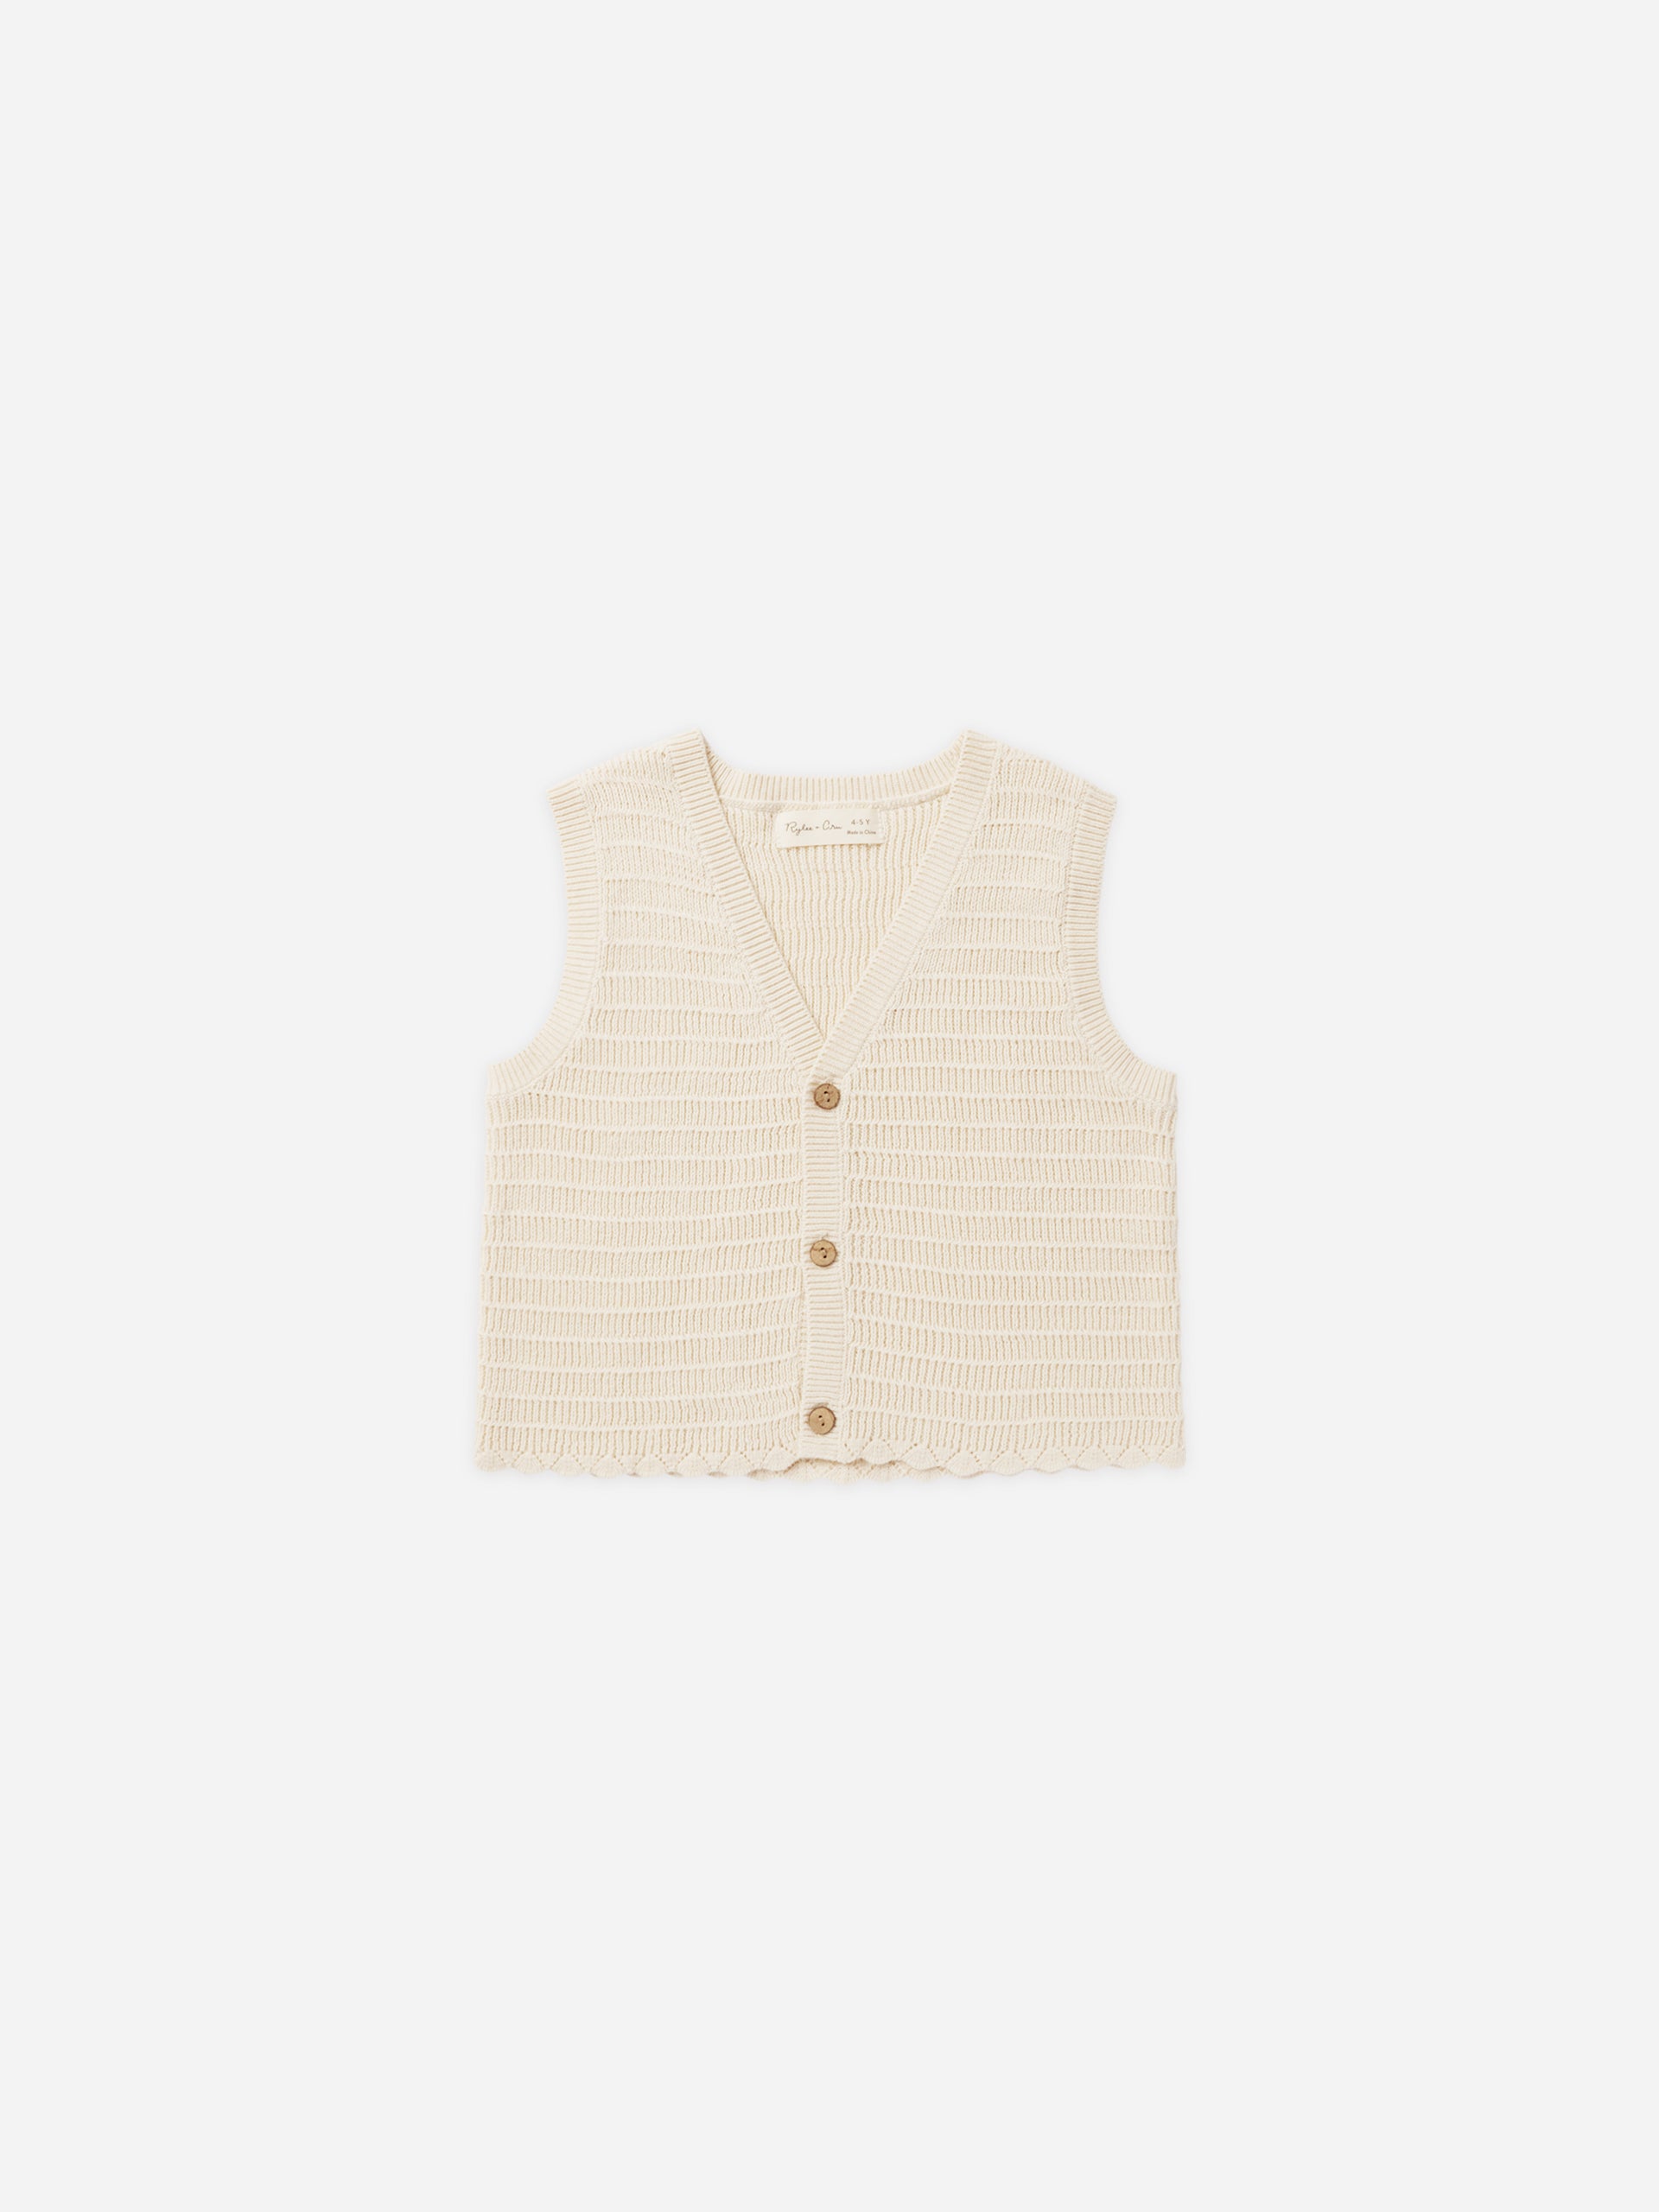 Knit Vest || Natural - Rylee + Cru | Kids Clothes | Trendy Baby Clothes | Modern Infant Outfits |